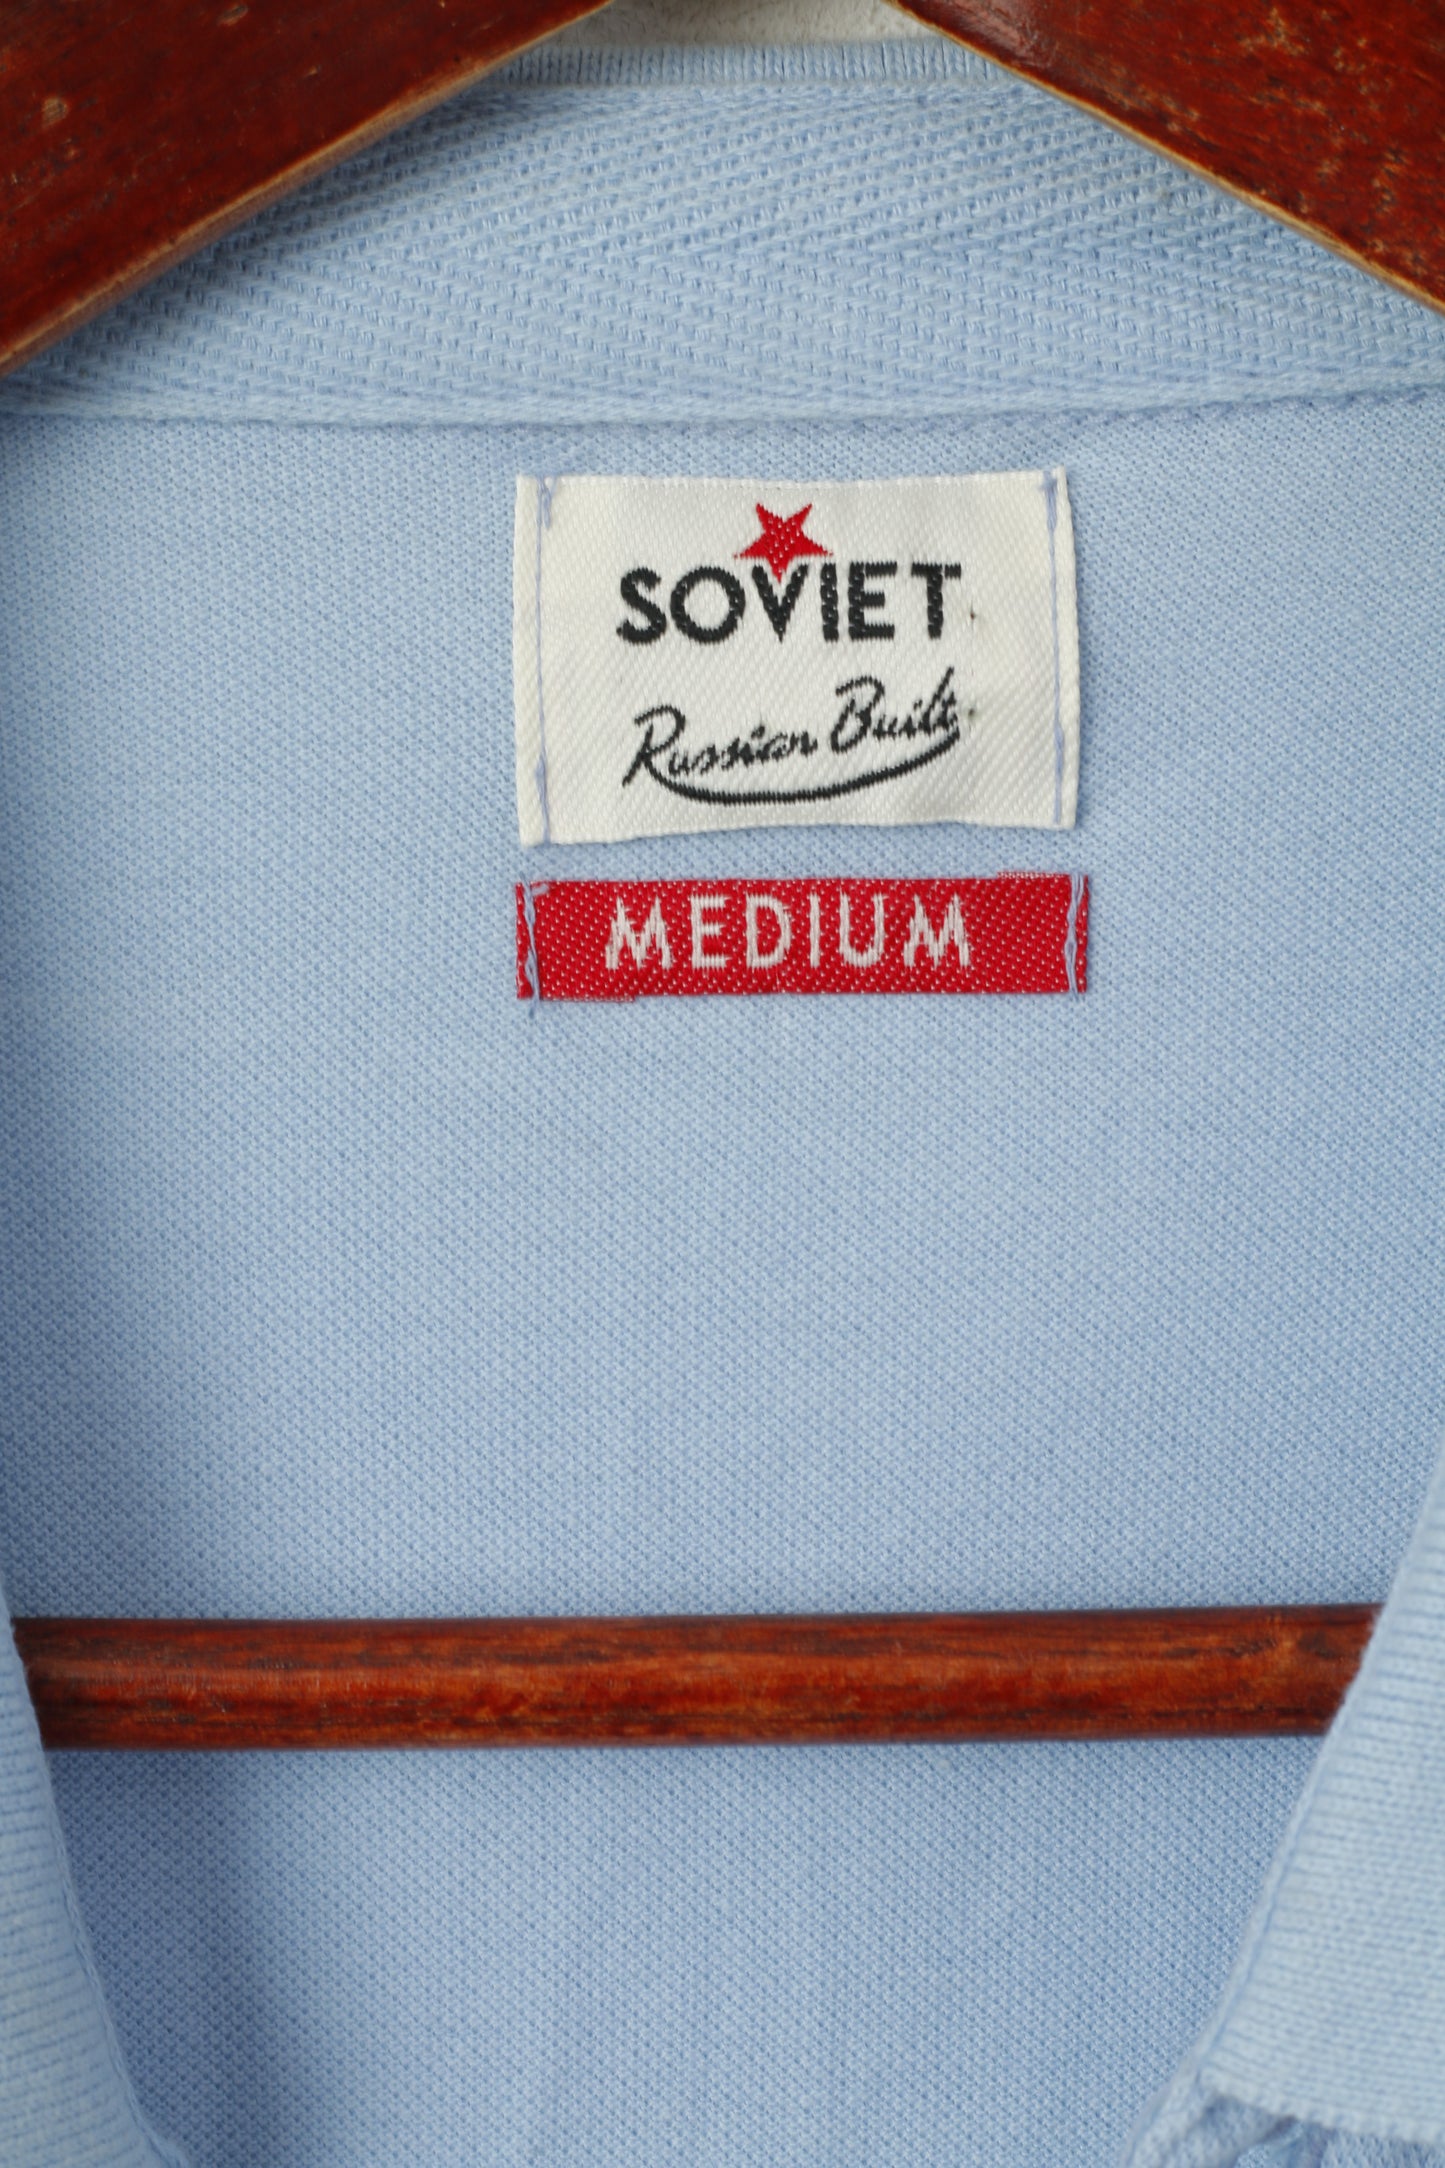 Soviet Russian Built Men M Polo Shirt Blue Cotton Triangle Printed Detailed Buttons Top